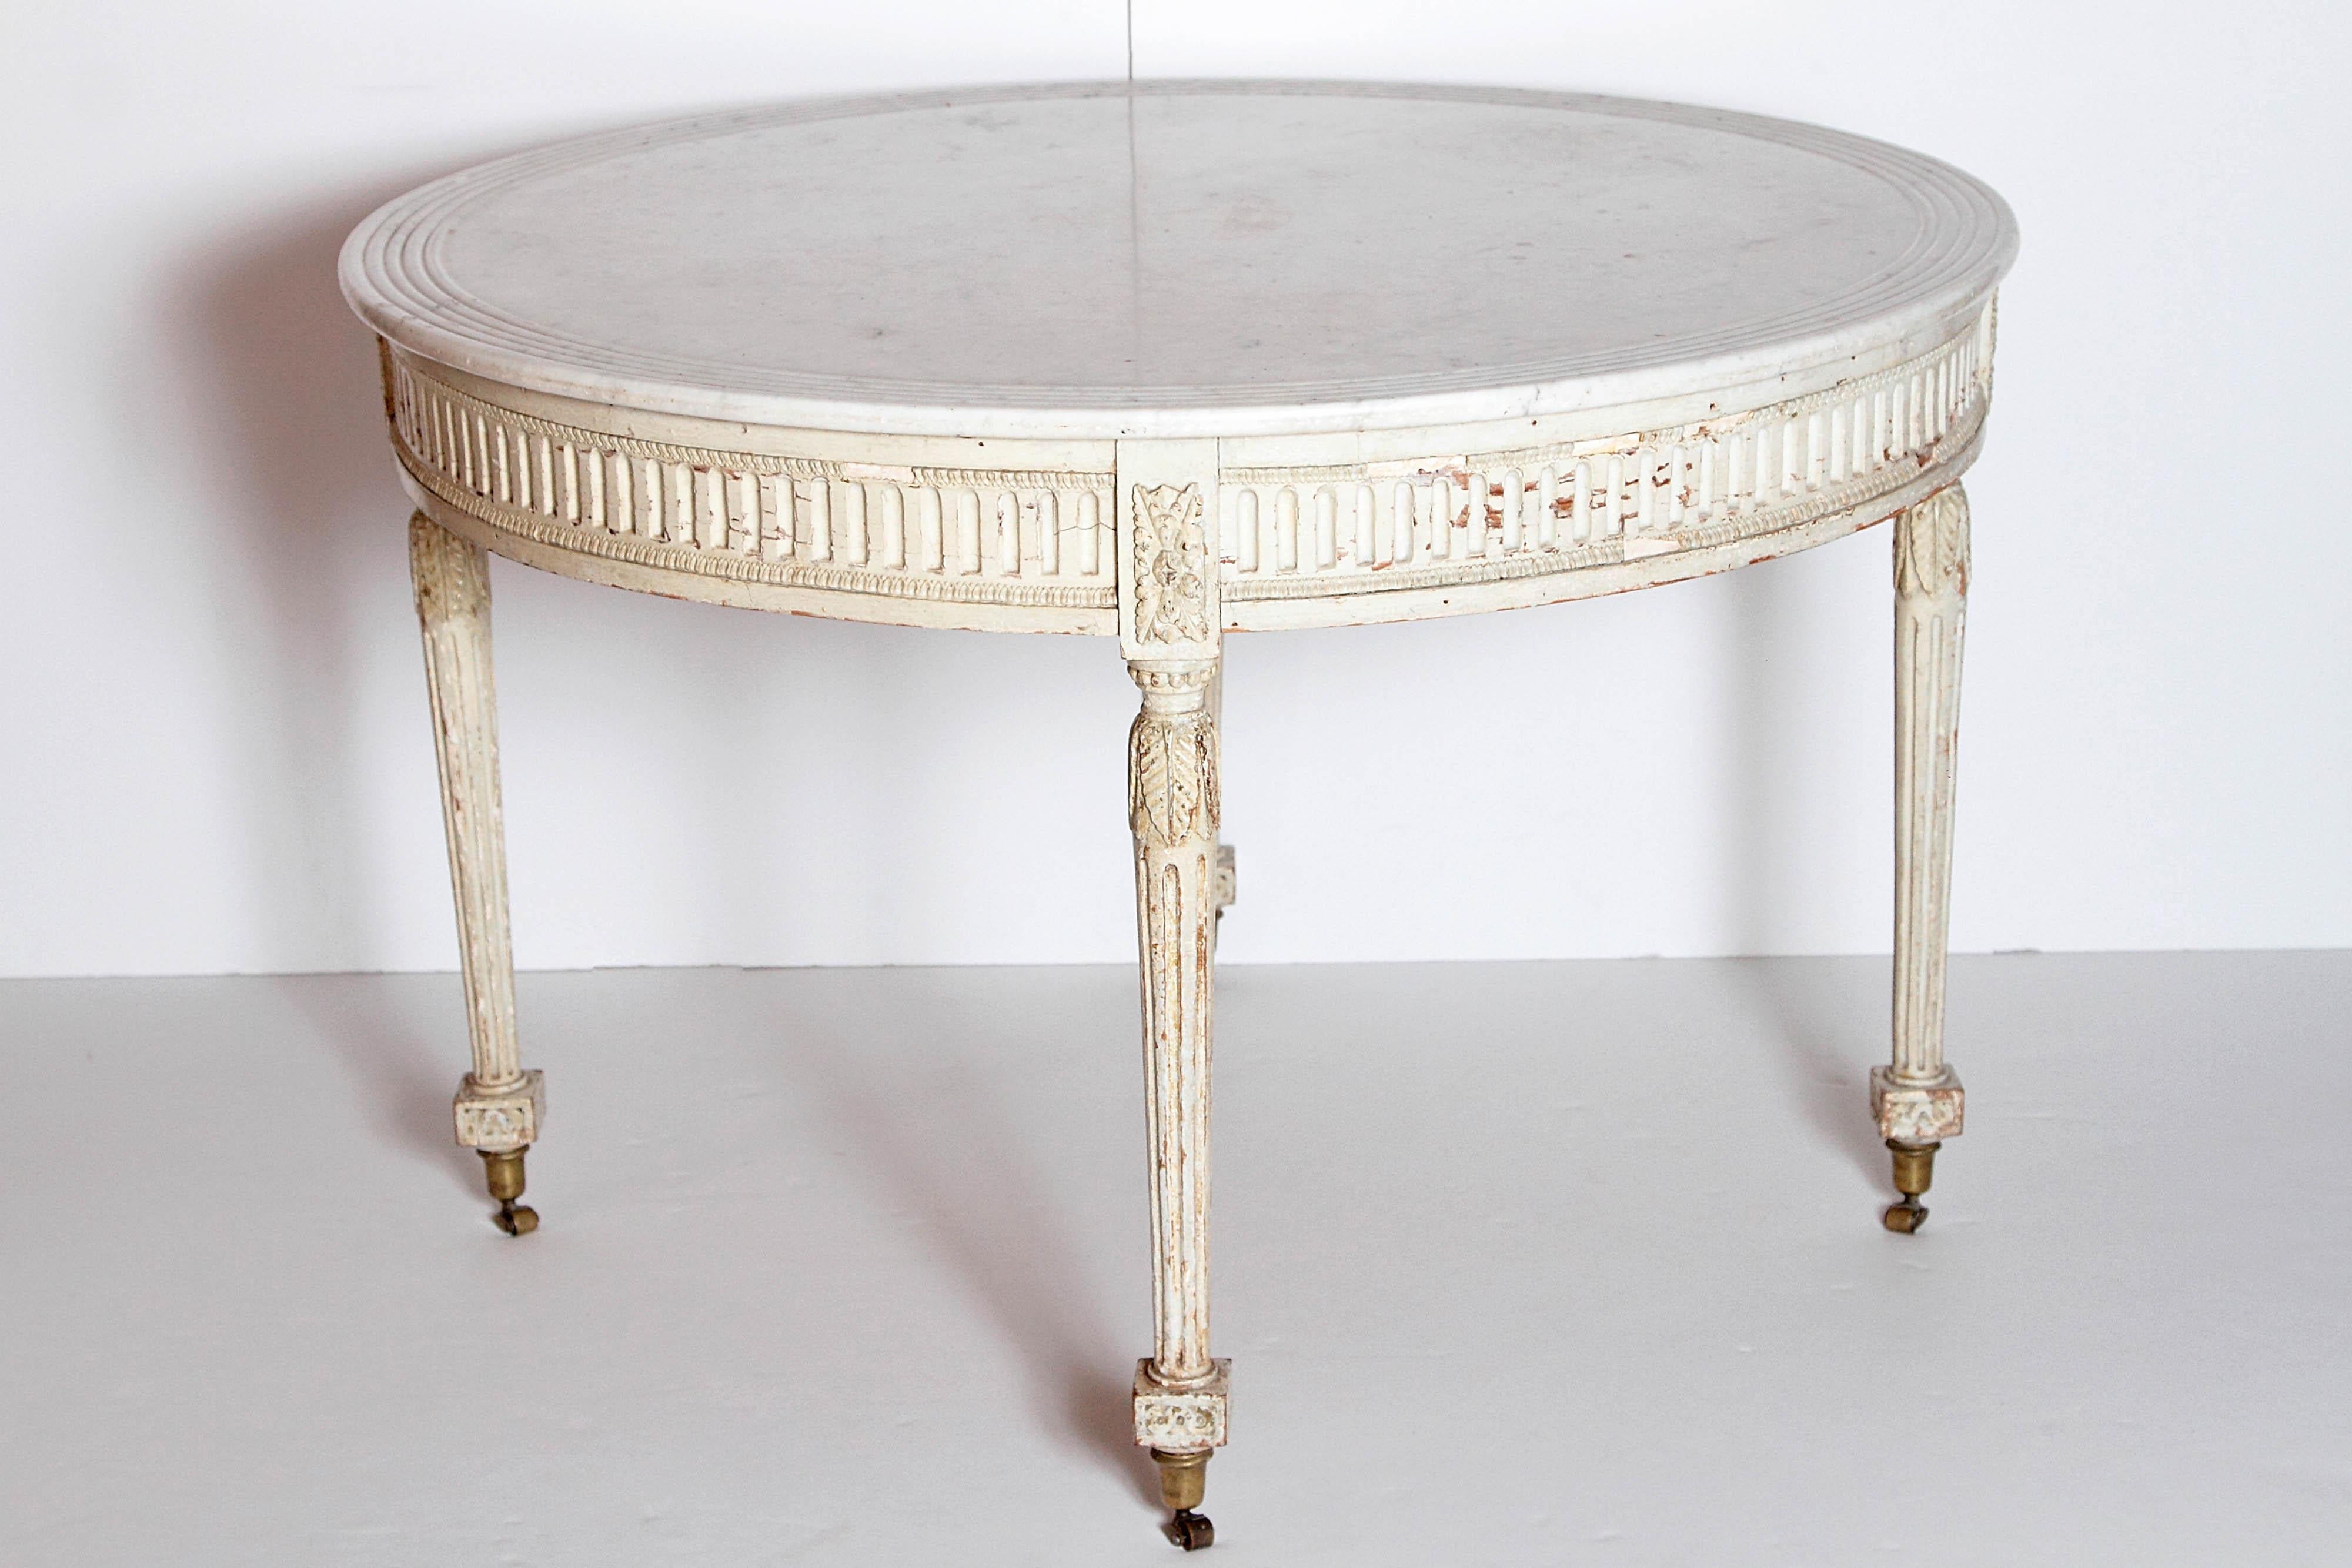 19th Century Neoclassical Round Painted Table with Marble Top